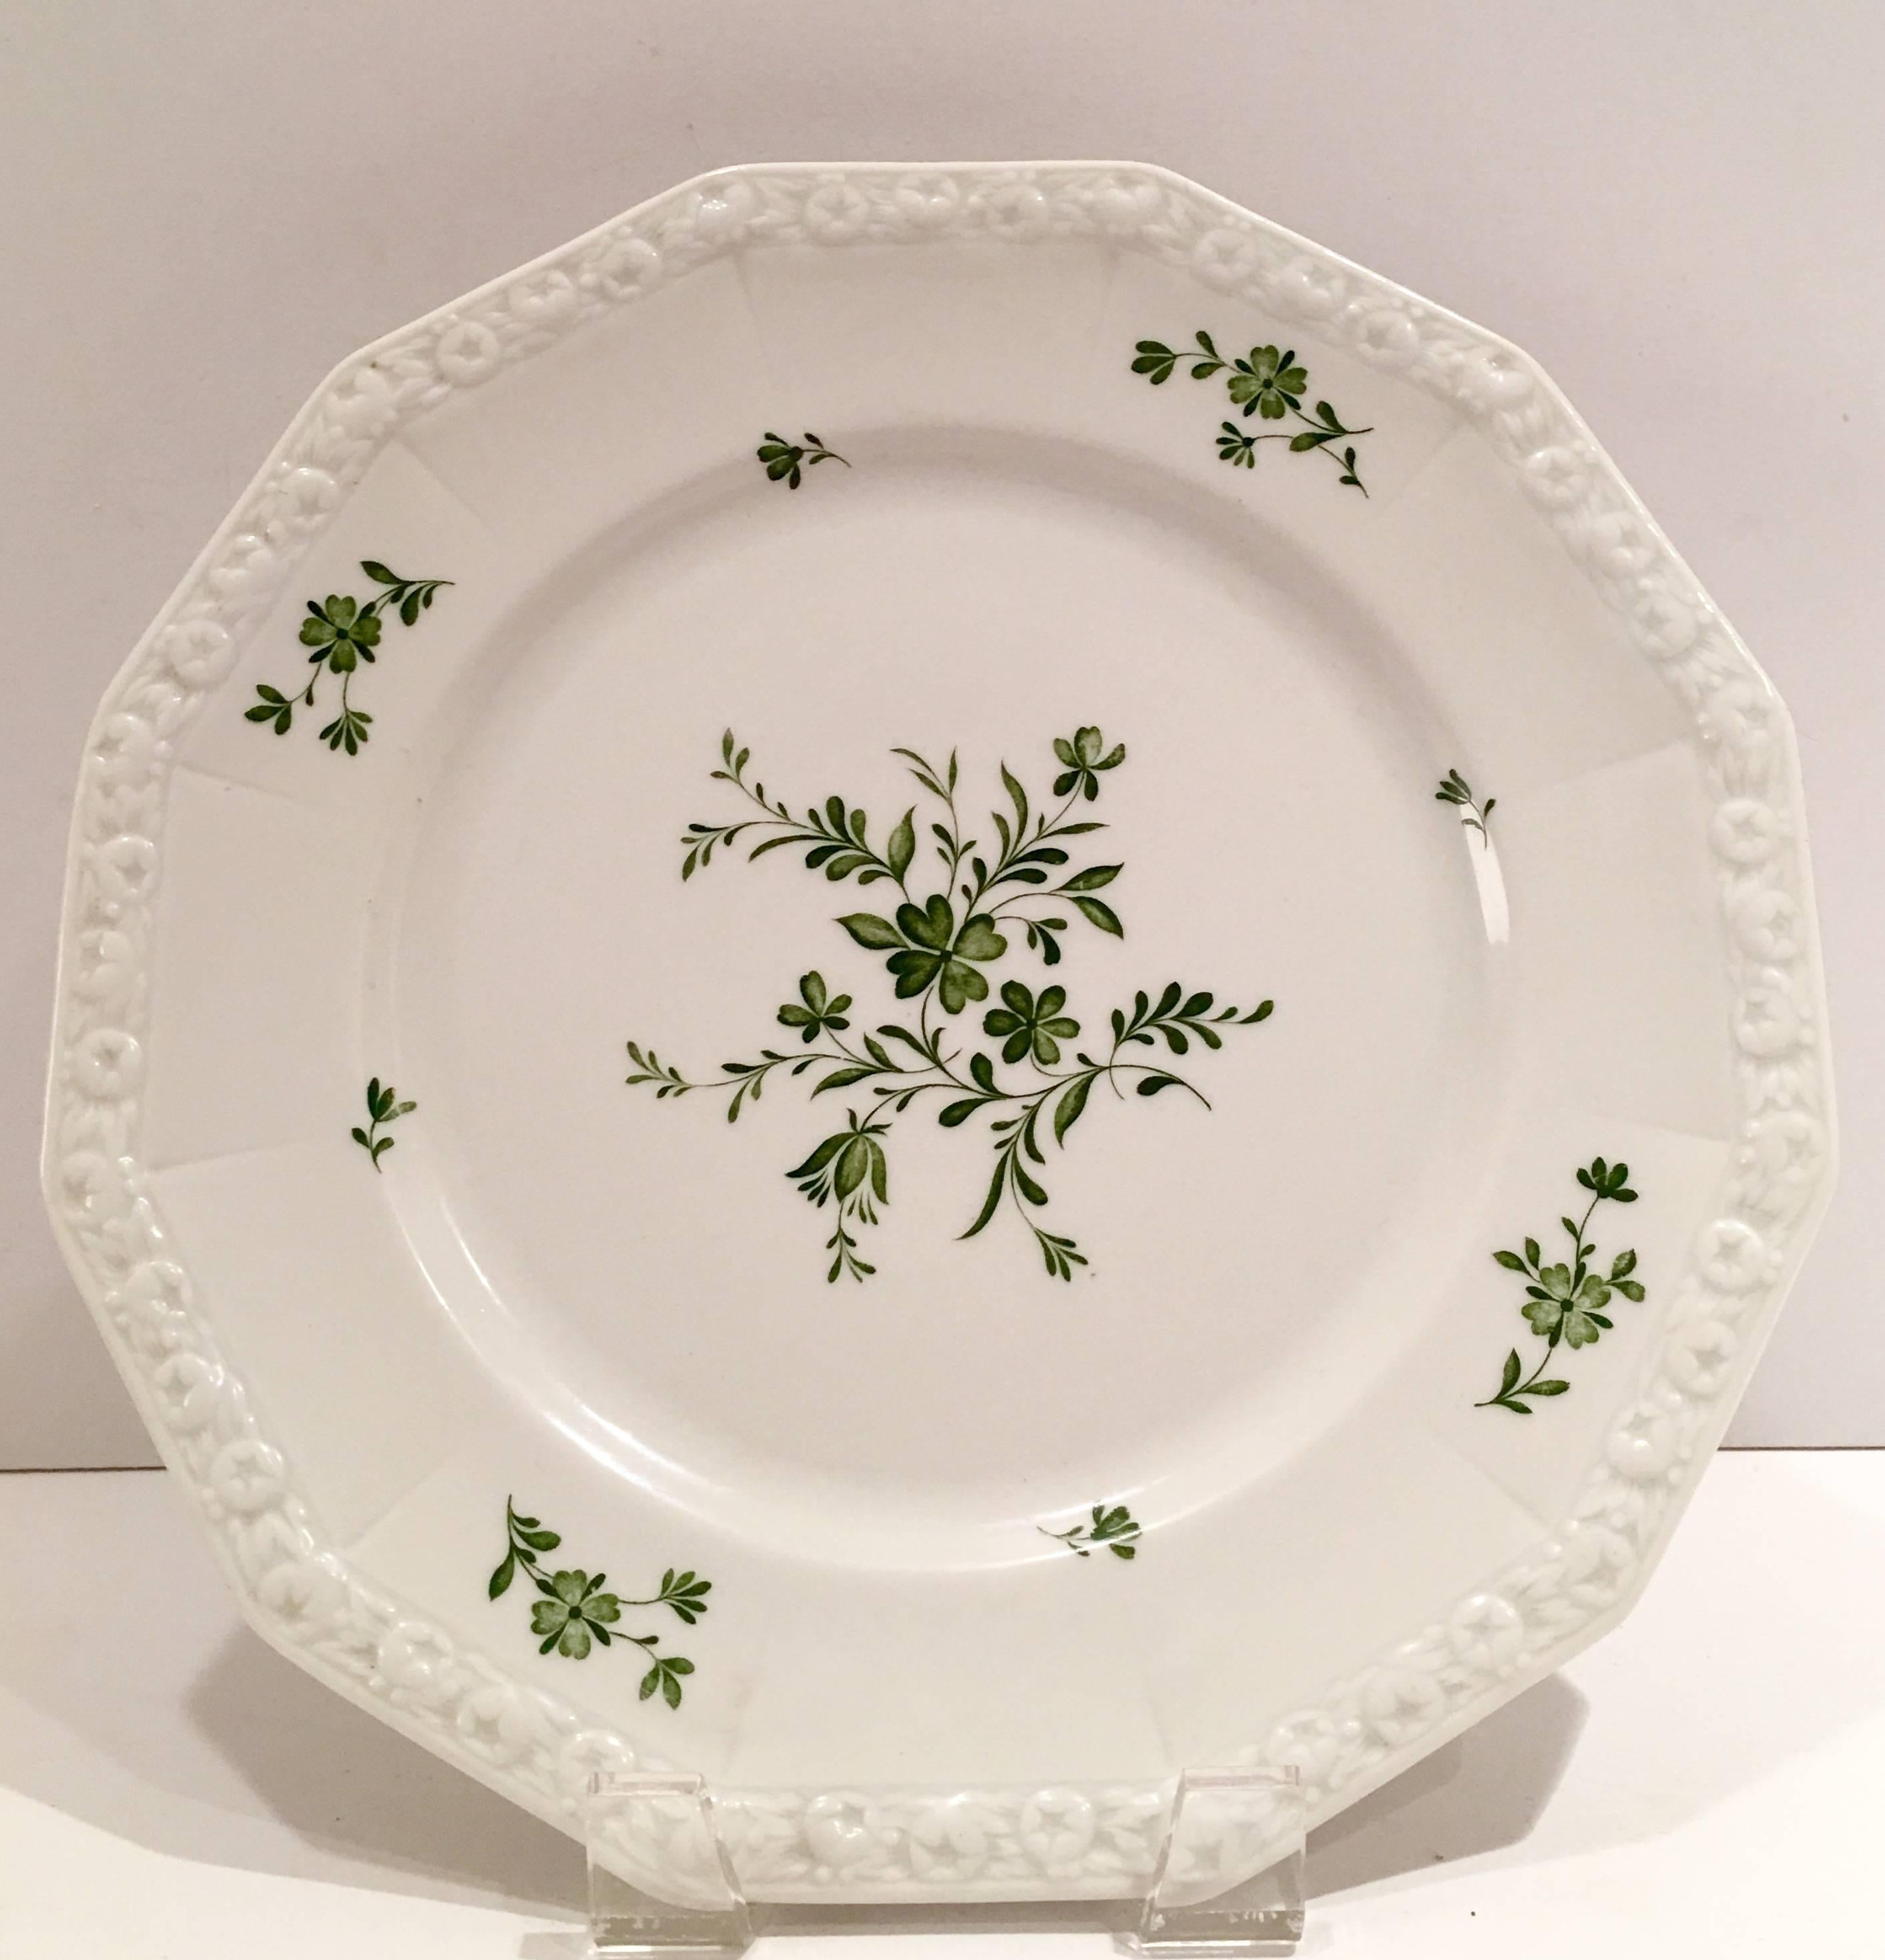 Rare Rosenthal Germany set of 11 pieces in "Maria Green" bone china. Set includes, two dinner plates, seven salad/dessert plates, 8" dia. and two fruit bowls, 5" dia. Maria green is a bright white ground with a medium green